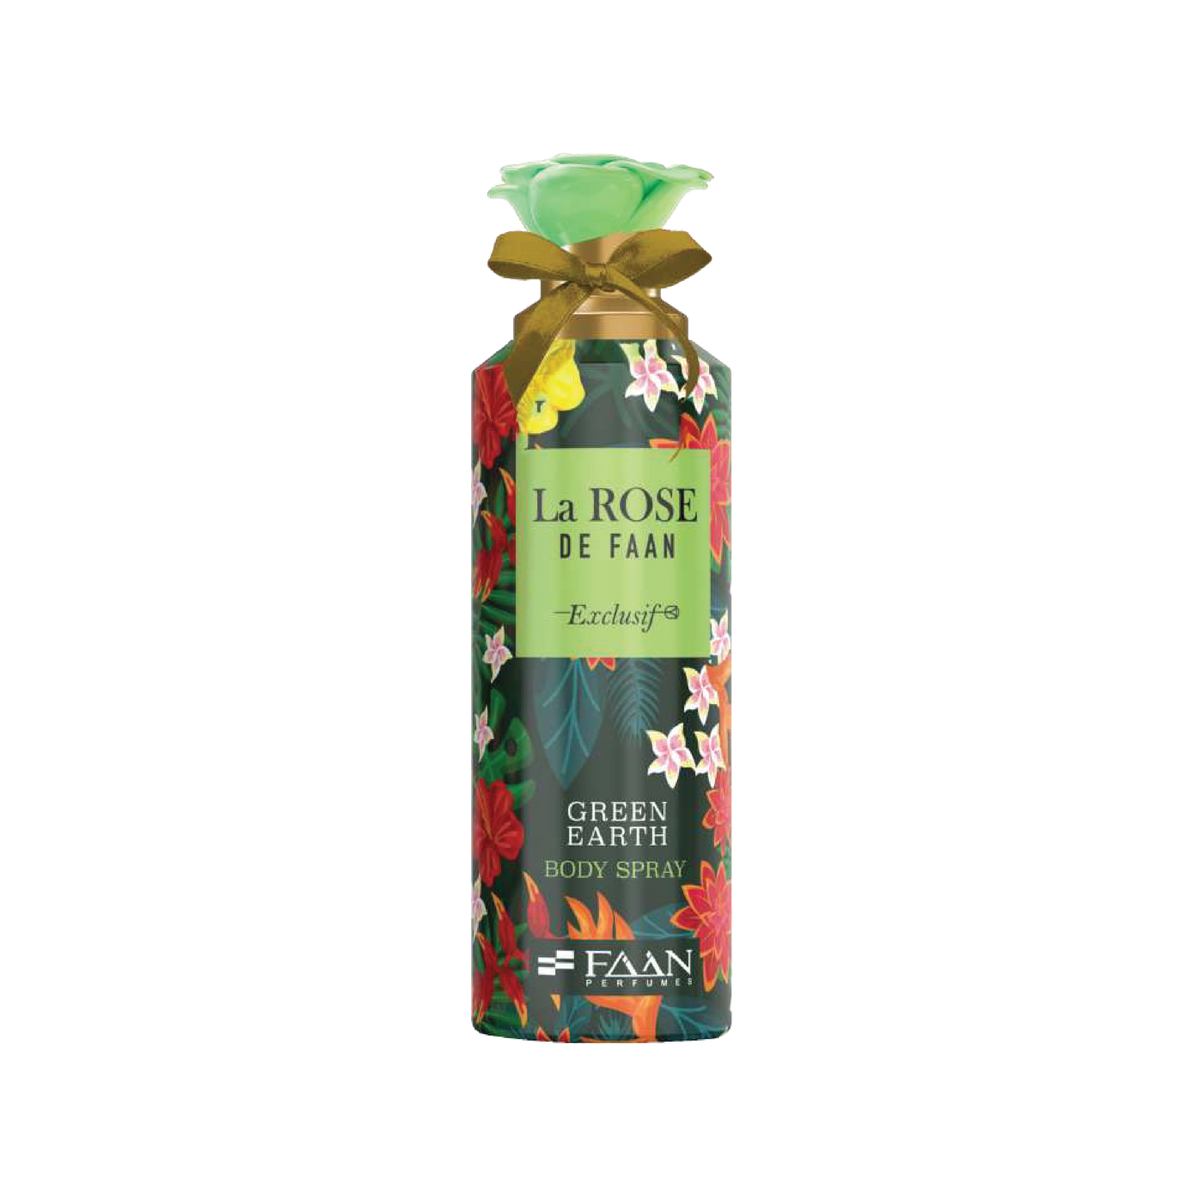 Reconnect with Nature's Serenity with LA ROSE's New Body Spray Green Earth